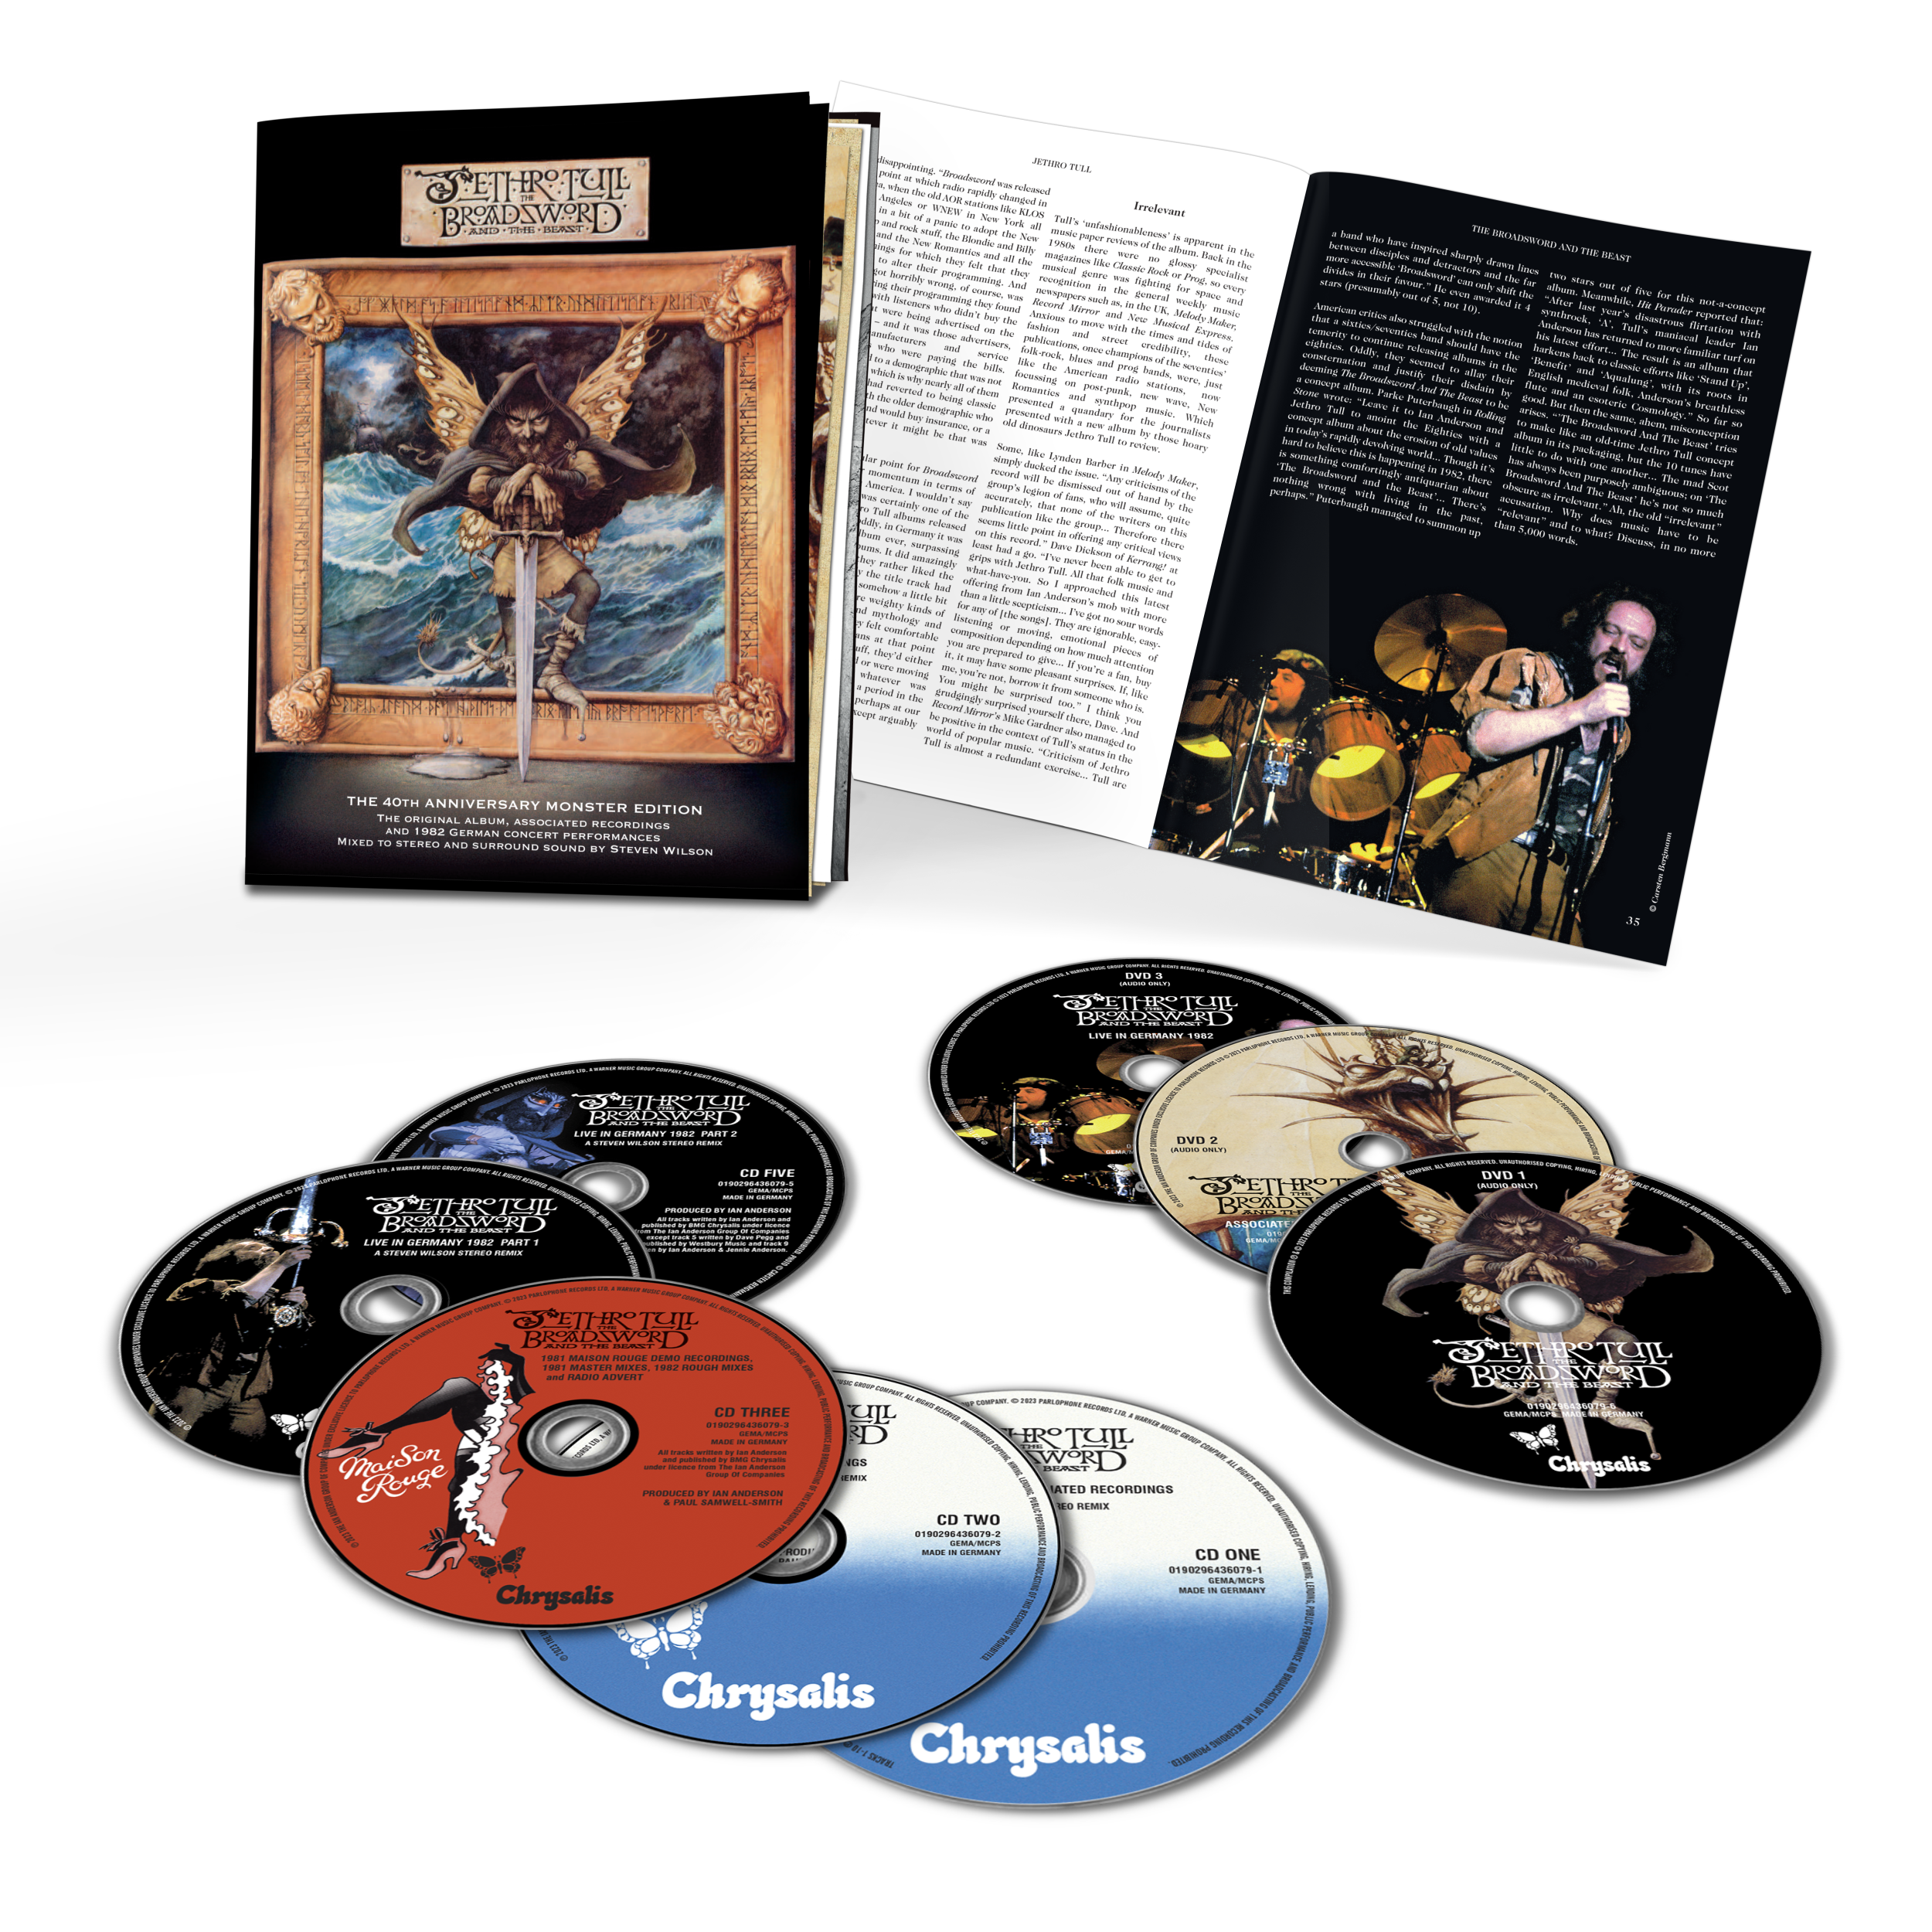 jethro-tull_the-broadsword-and-the-beast-monster_boxset.png